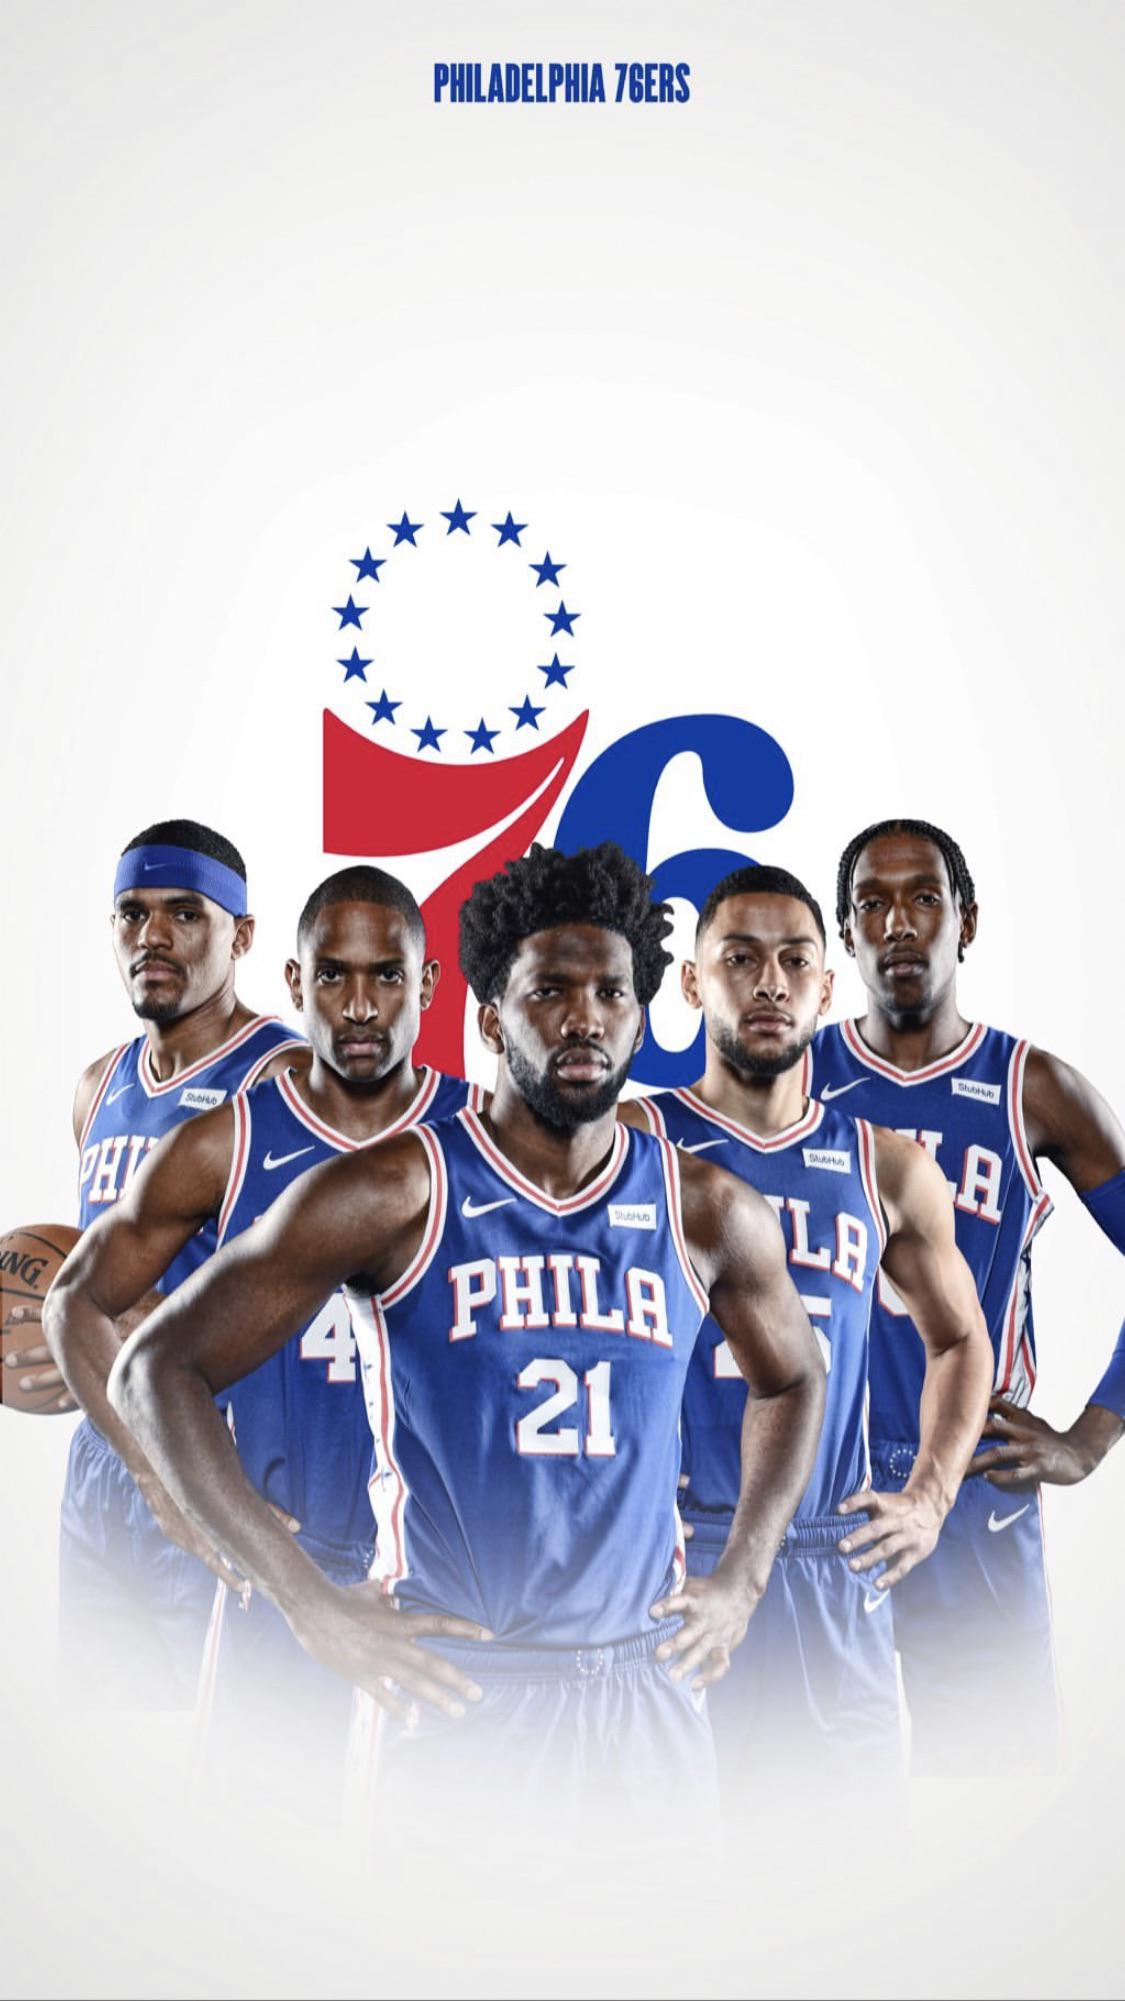 Gotta love this new iPhone wallpaper!: sixers